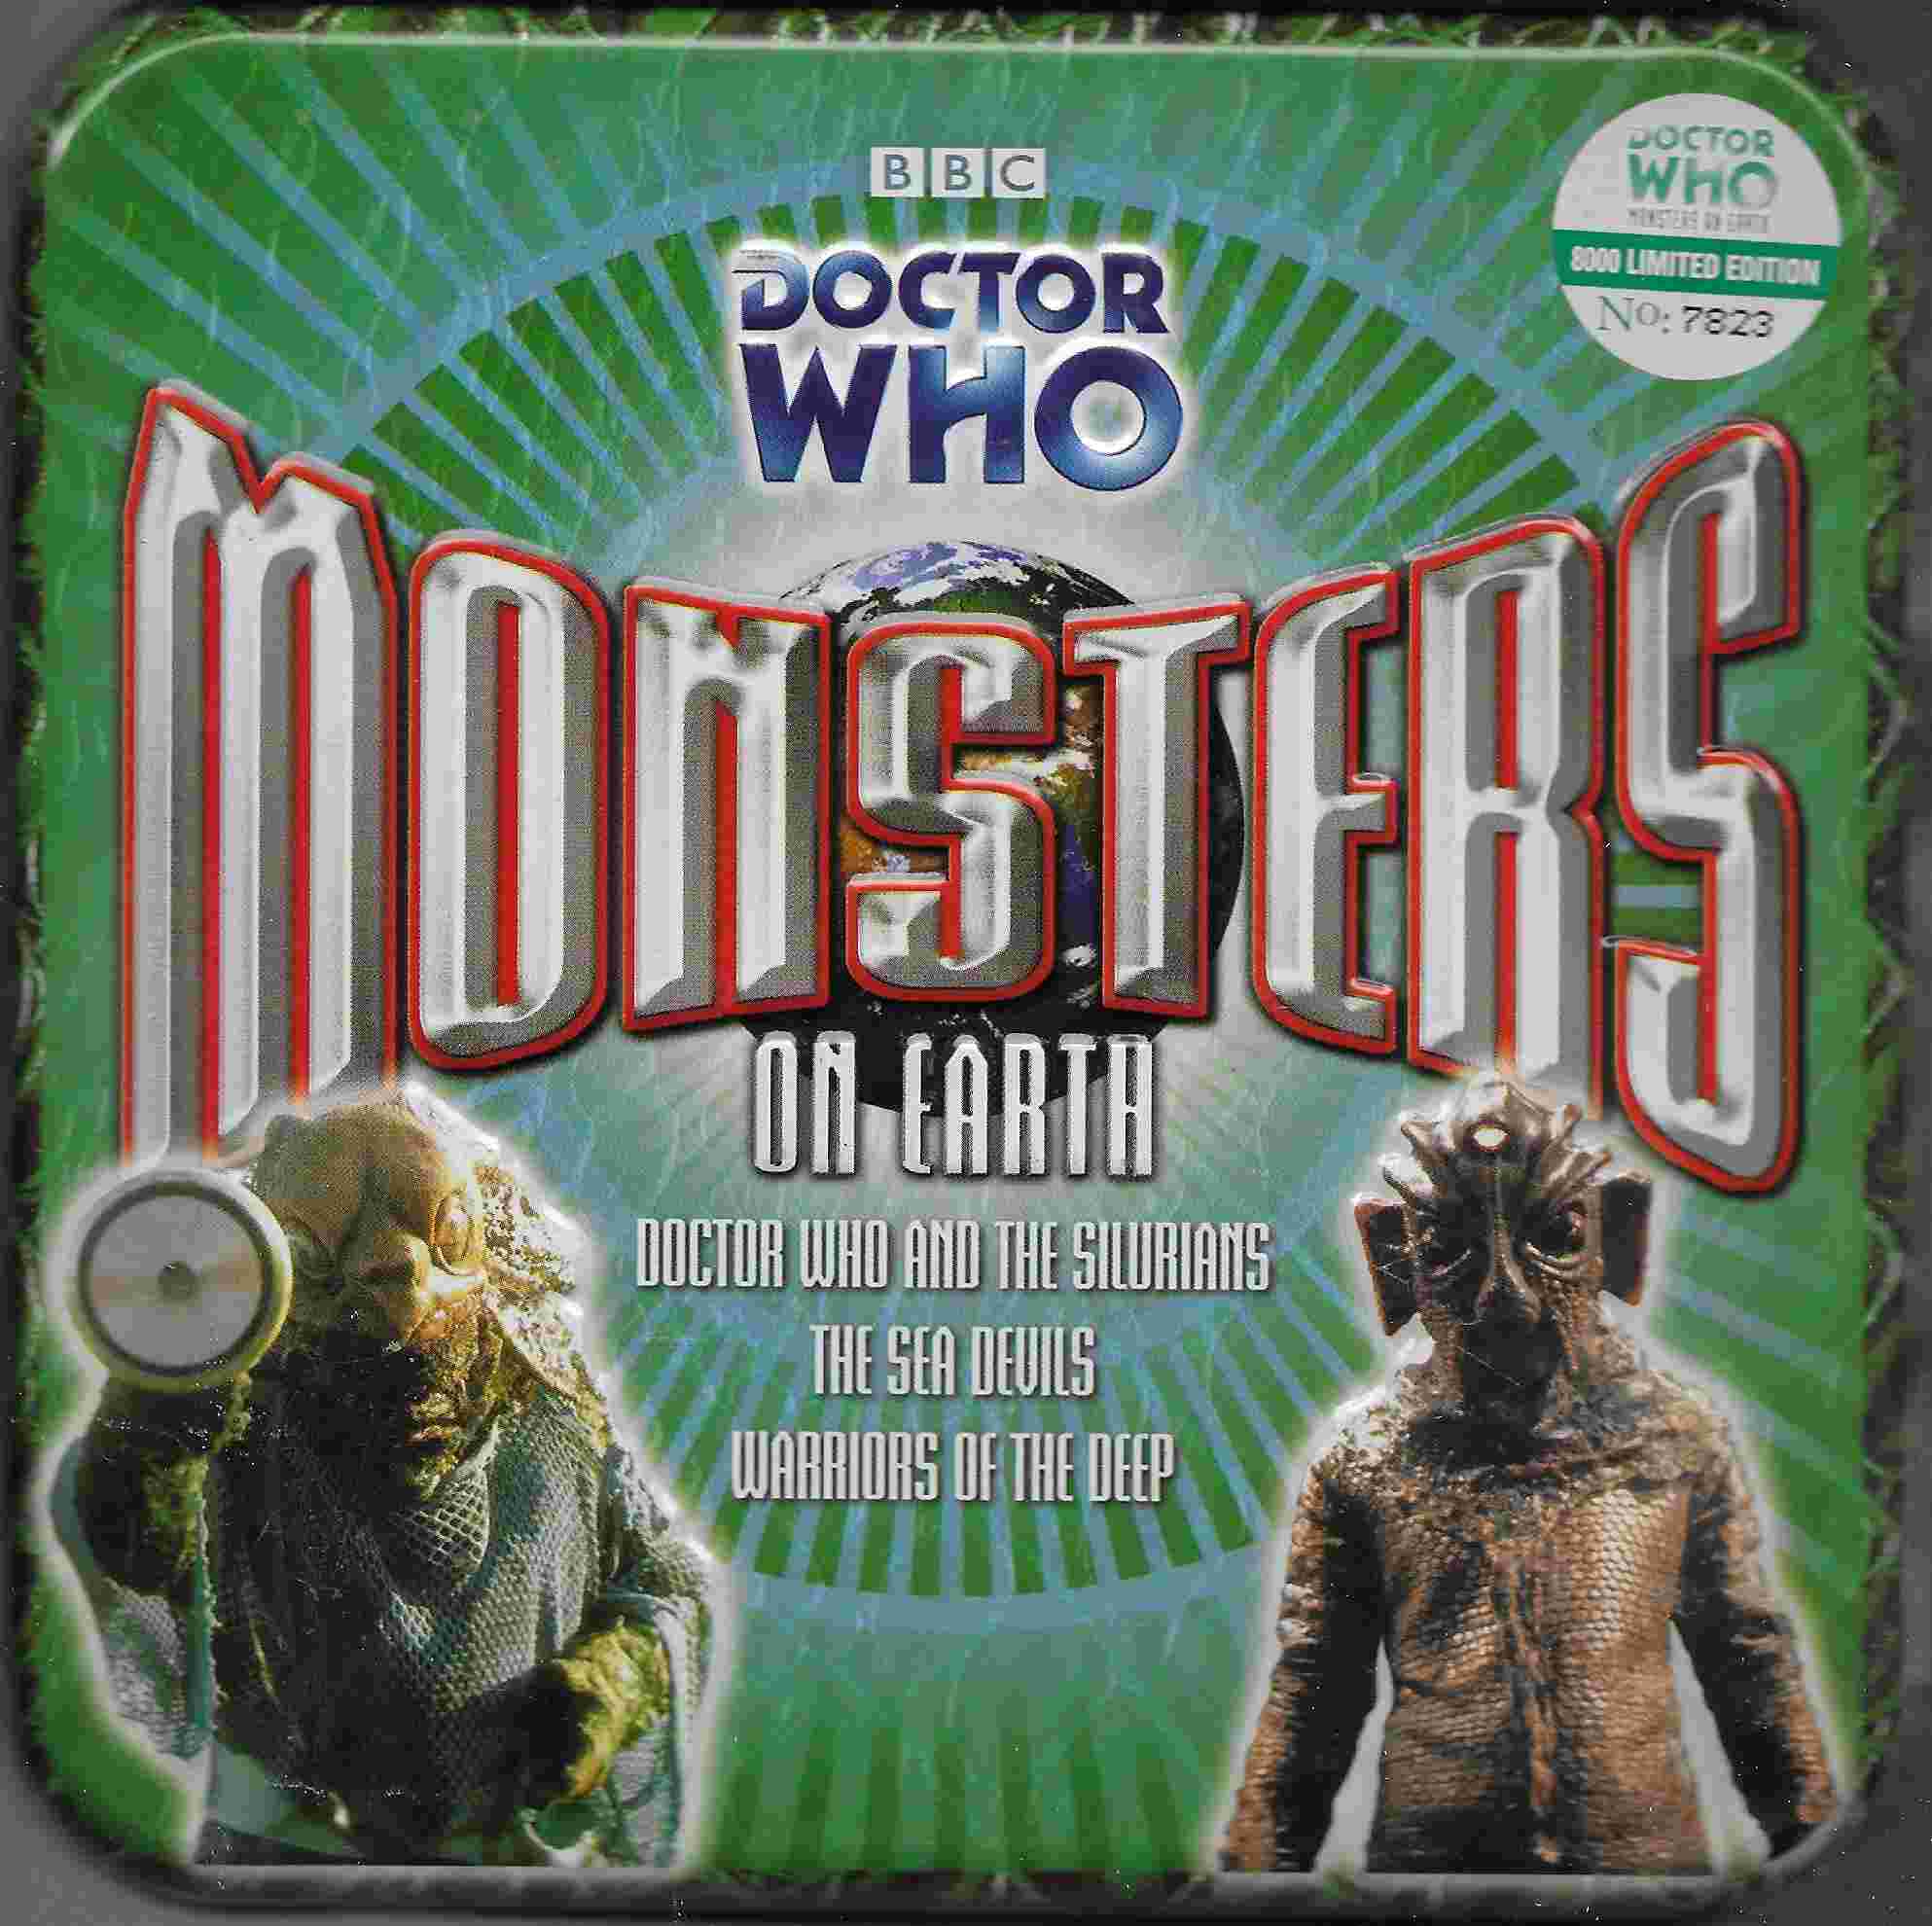 Picture of ISBN 1-846-07102-X Doctor Who - Monsters on Earth by artist Malcolm Hulke / Johnny Byrne from the BBC cds - Records and Tapes library